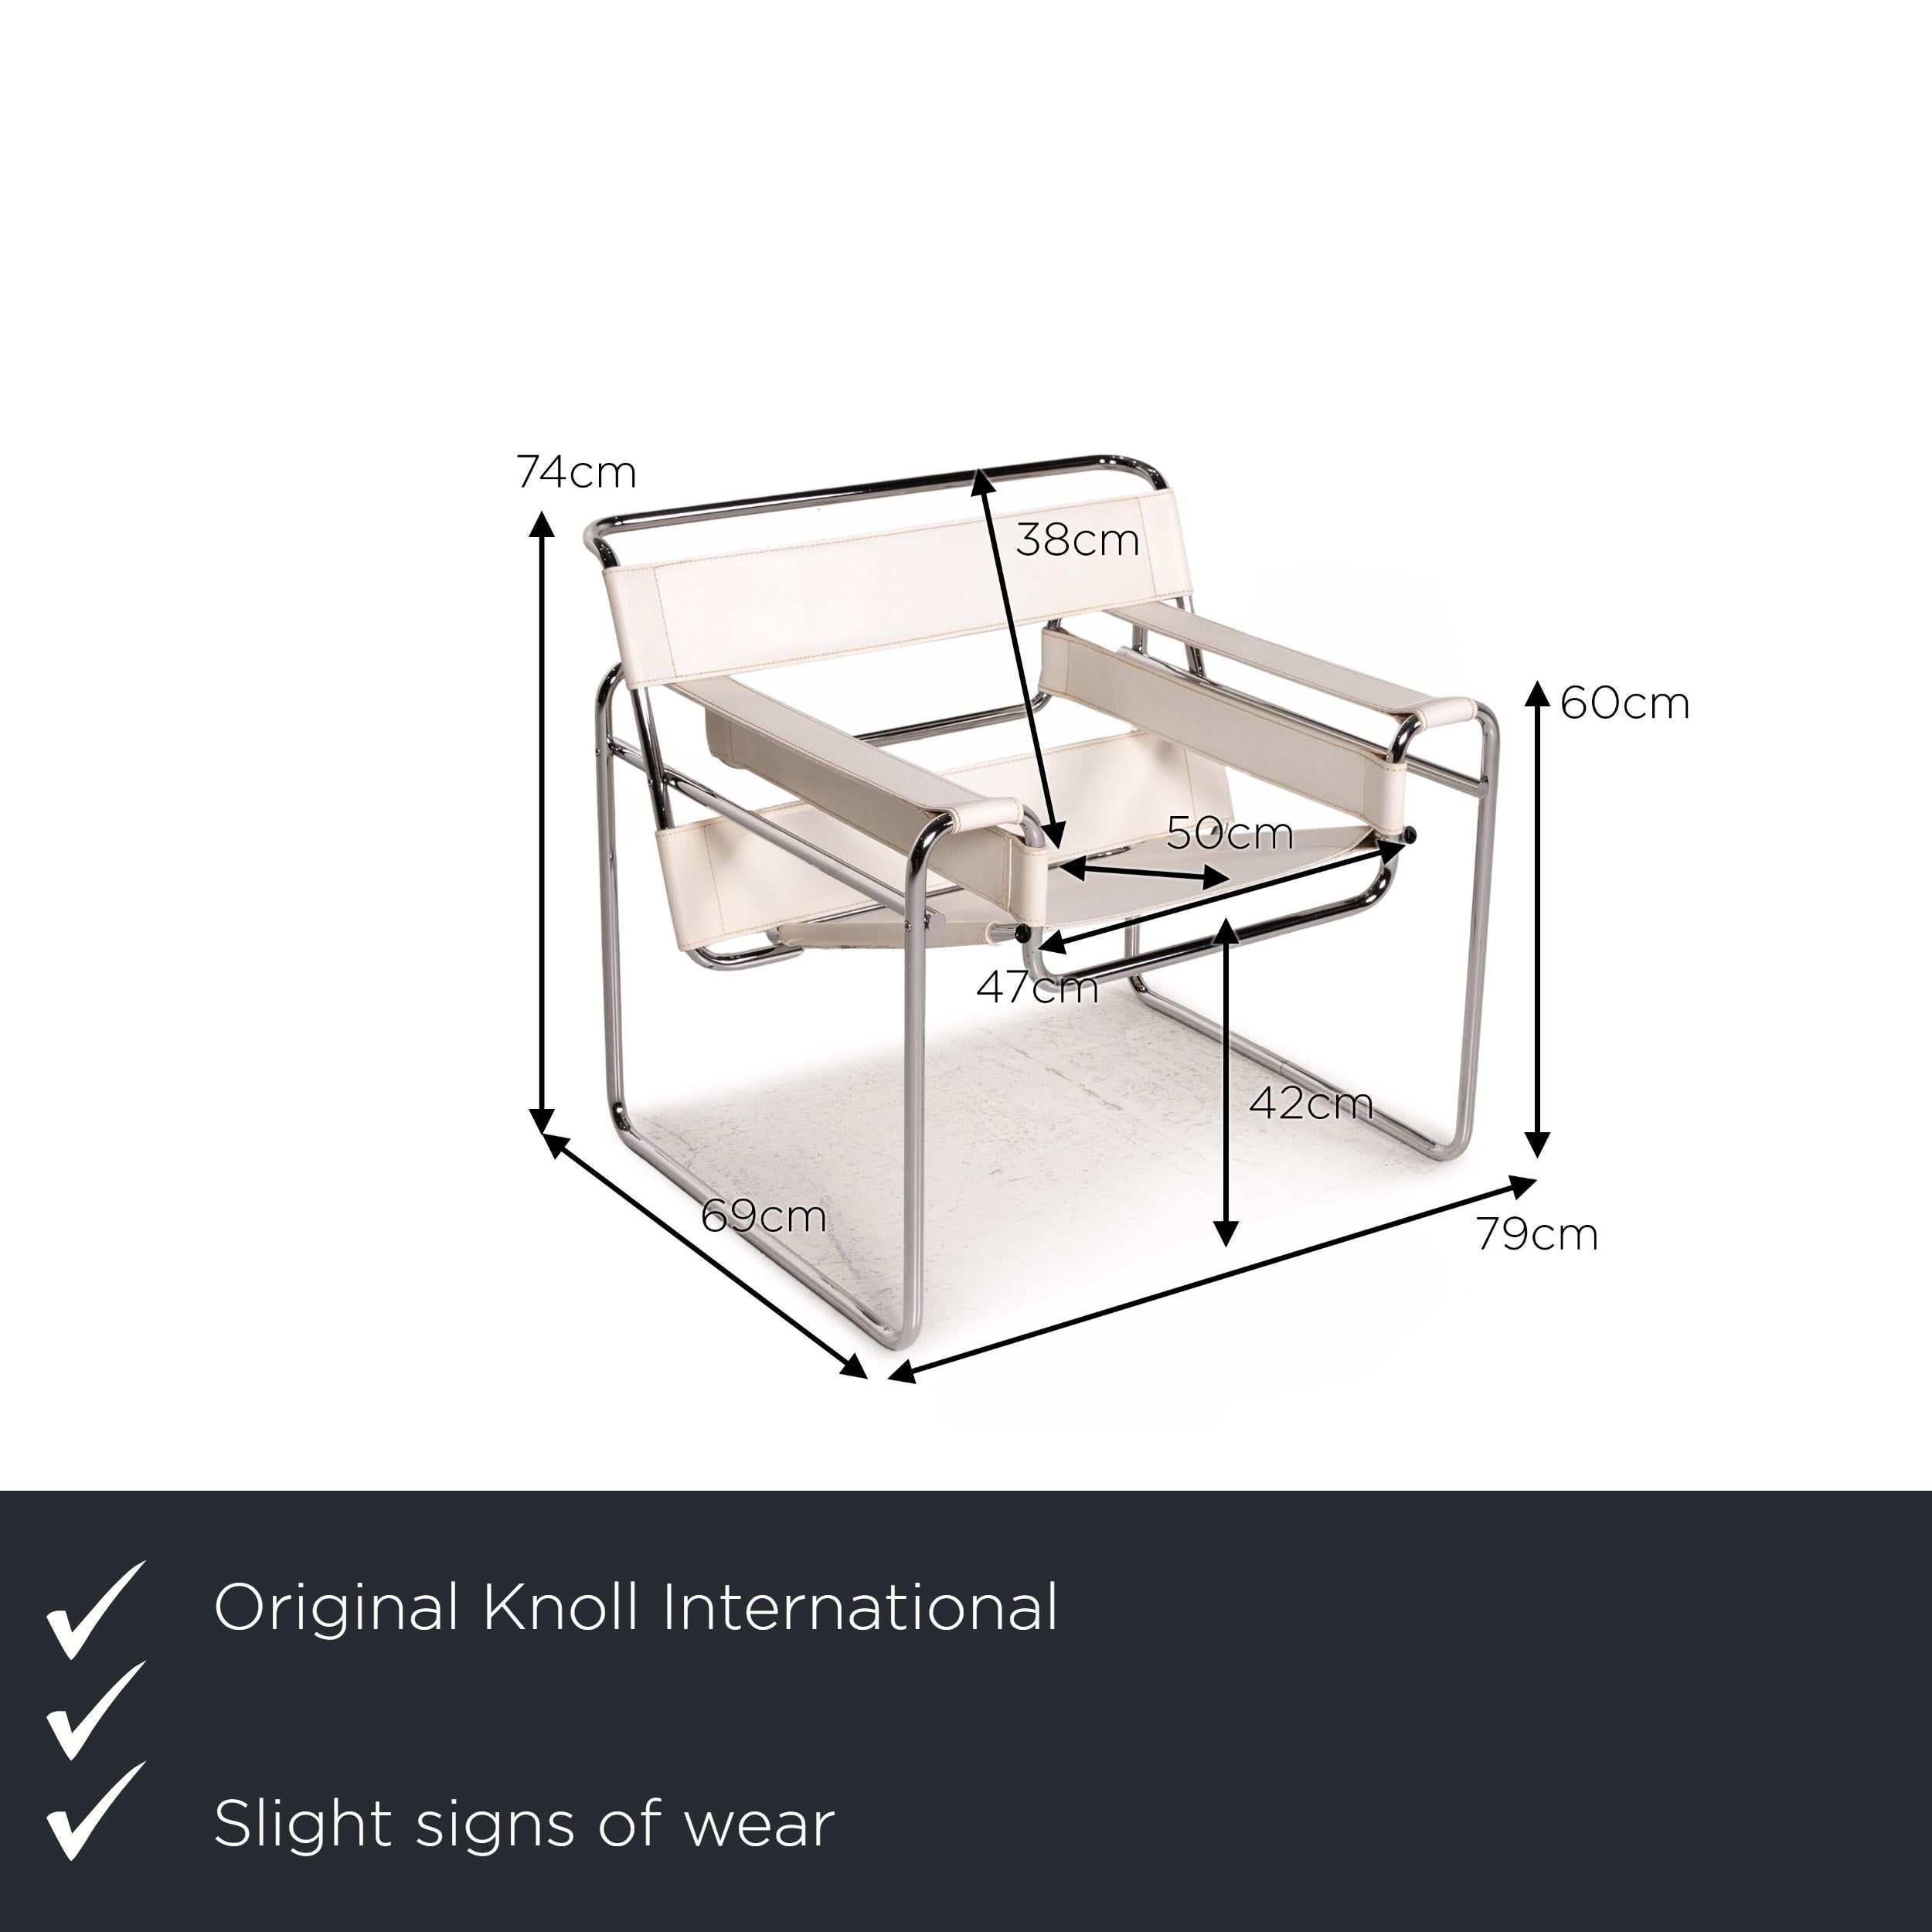 We present to you a Knoll International Wassily chair leather armchair white chair Marcel Breuer.

Product measurements in centimeters:

Depth 69
Width 79
Height 74
Seat height 42
Rest height 60
Seat depth 50
Seat width 47
Back height